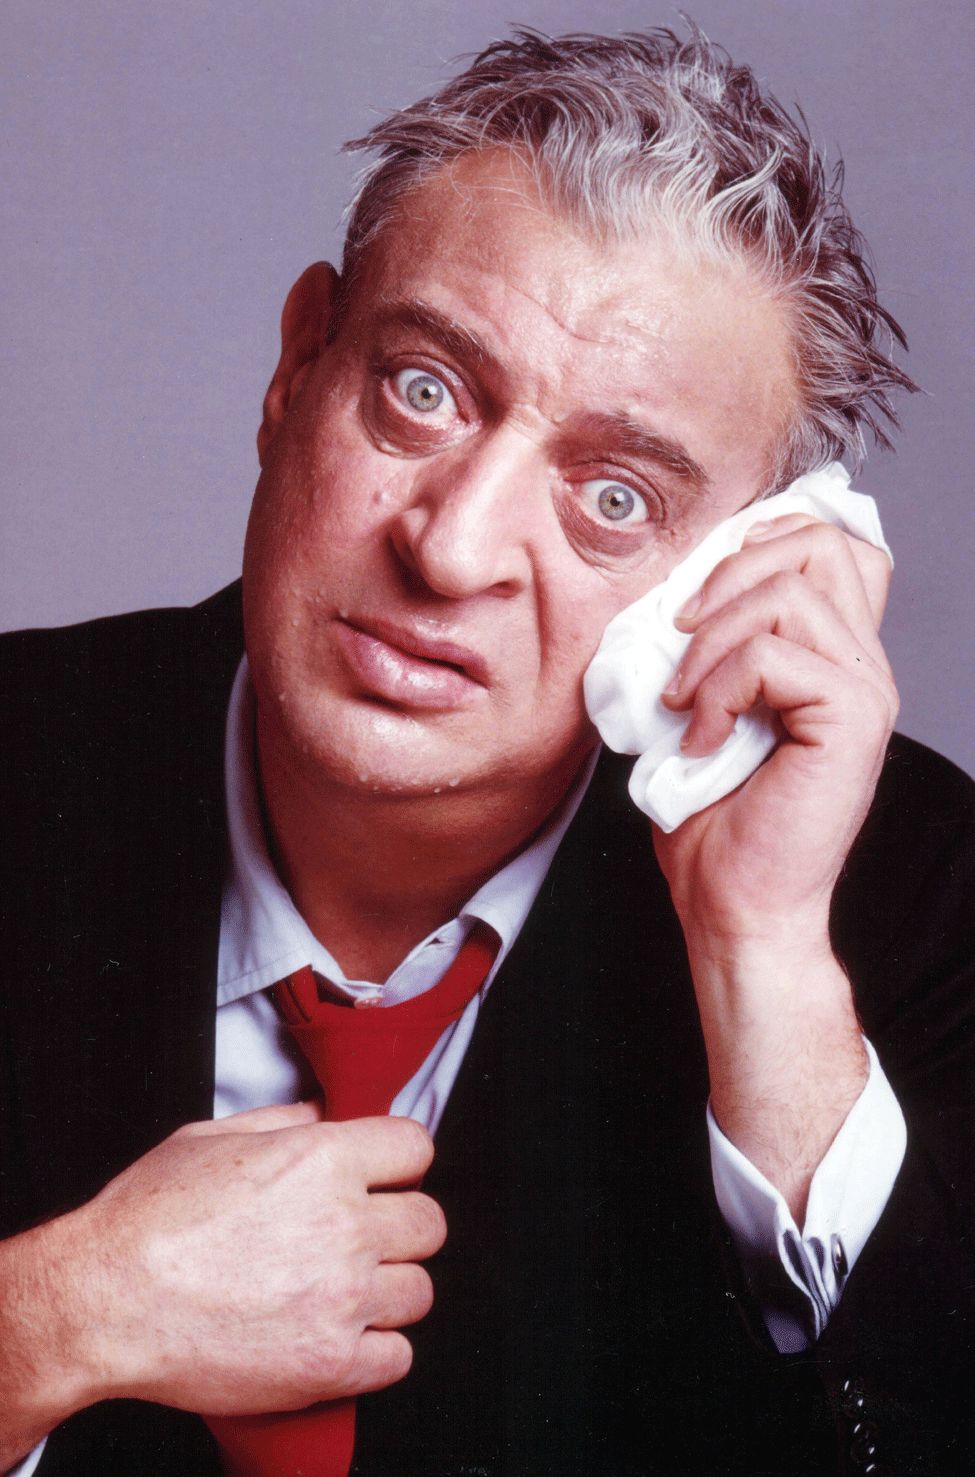 I Don't Get No Respect - The Hilarious One-Liners of Rodney Dangerfield